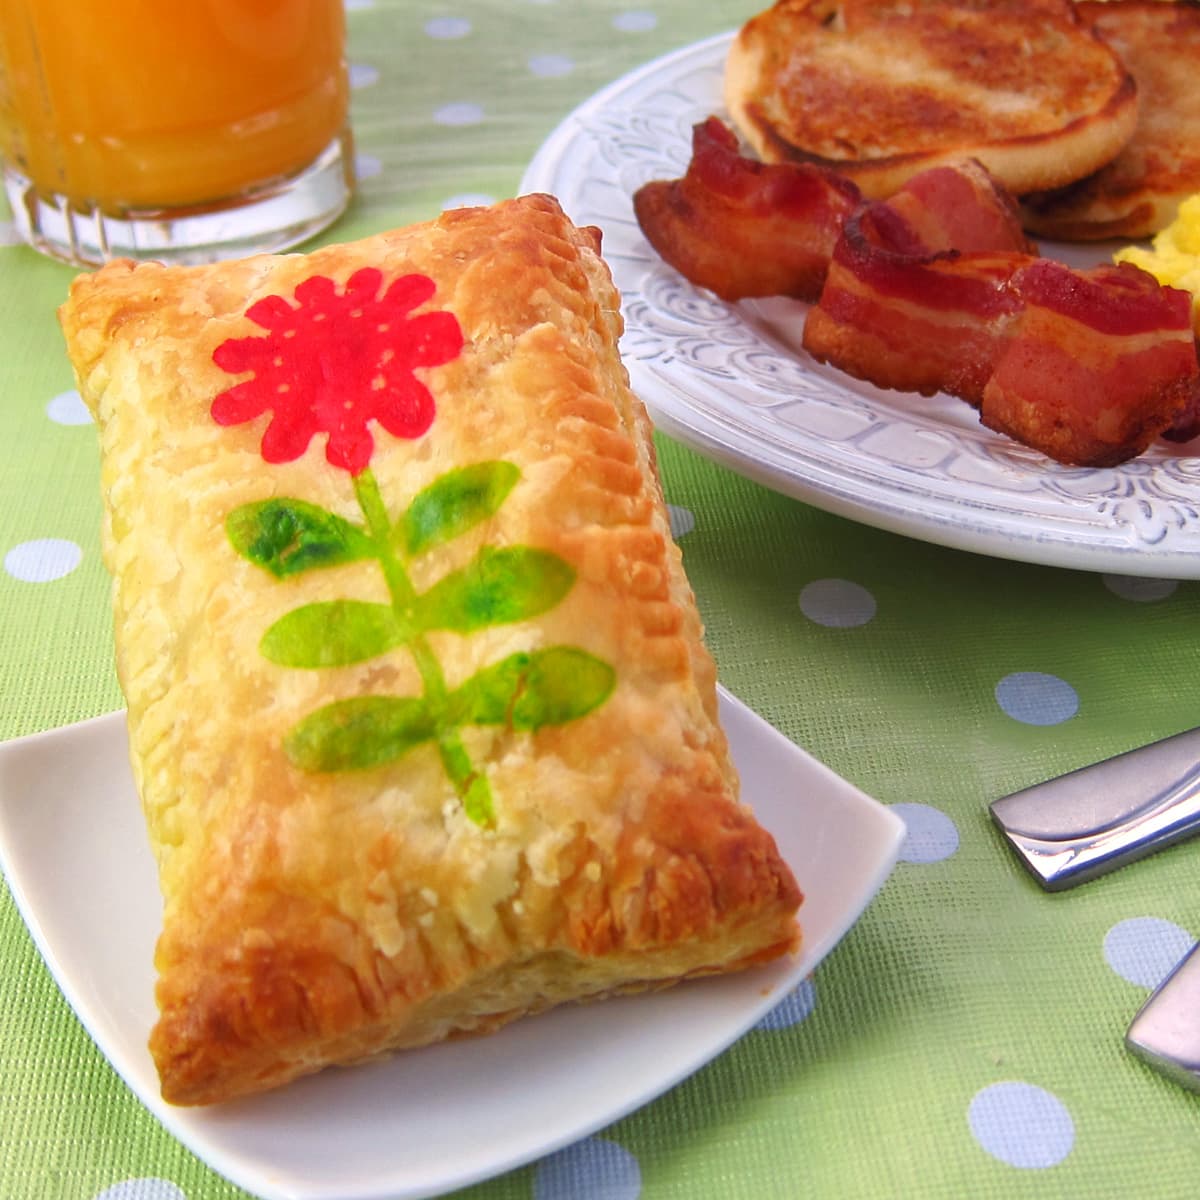 homemade pain au chocolate stamped with a food coloring design served with bacon, eggs, toast, and orange juice.